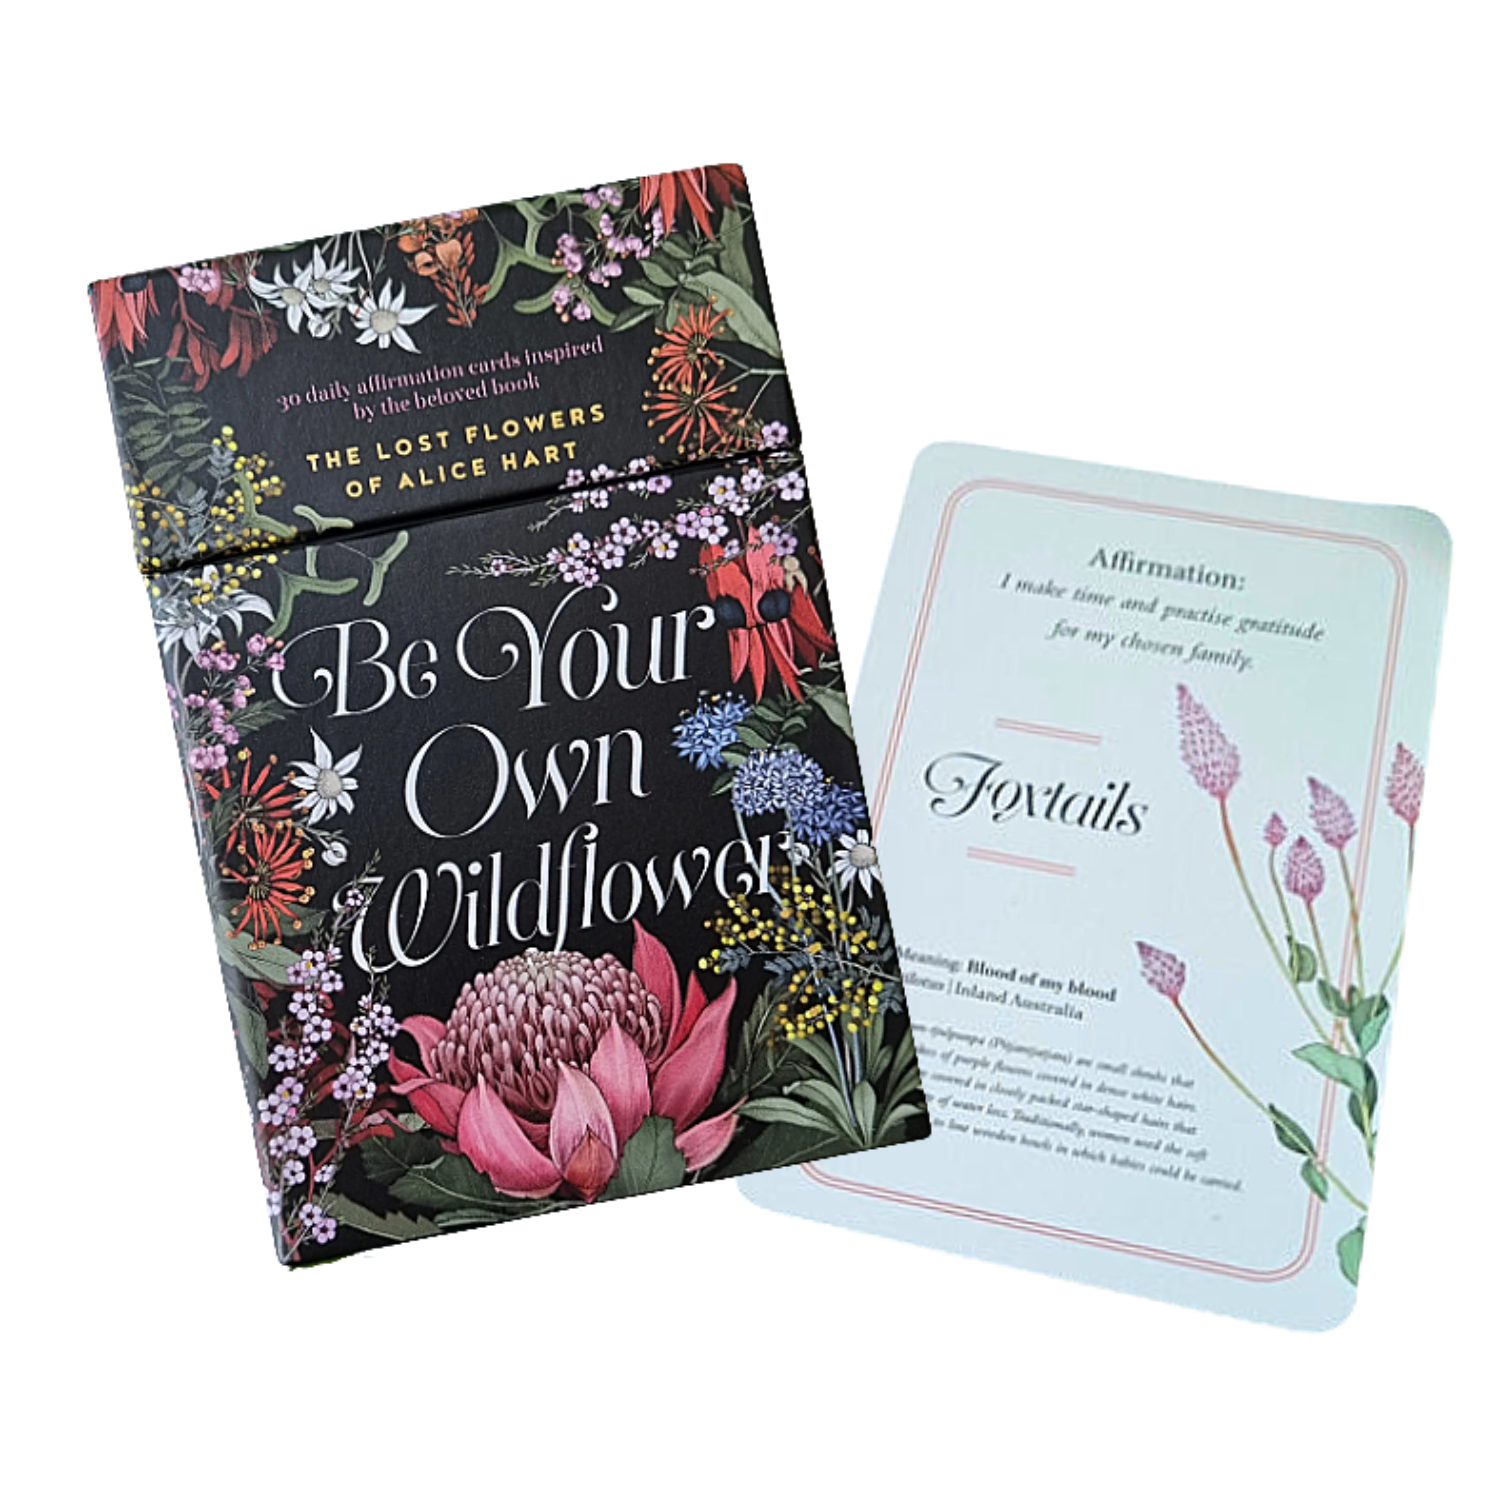 Be Your Own Wildflower - Daily Affirmation Cards